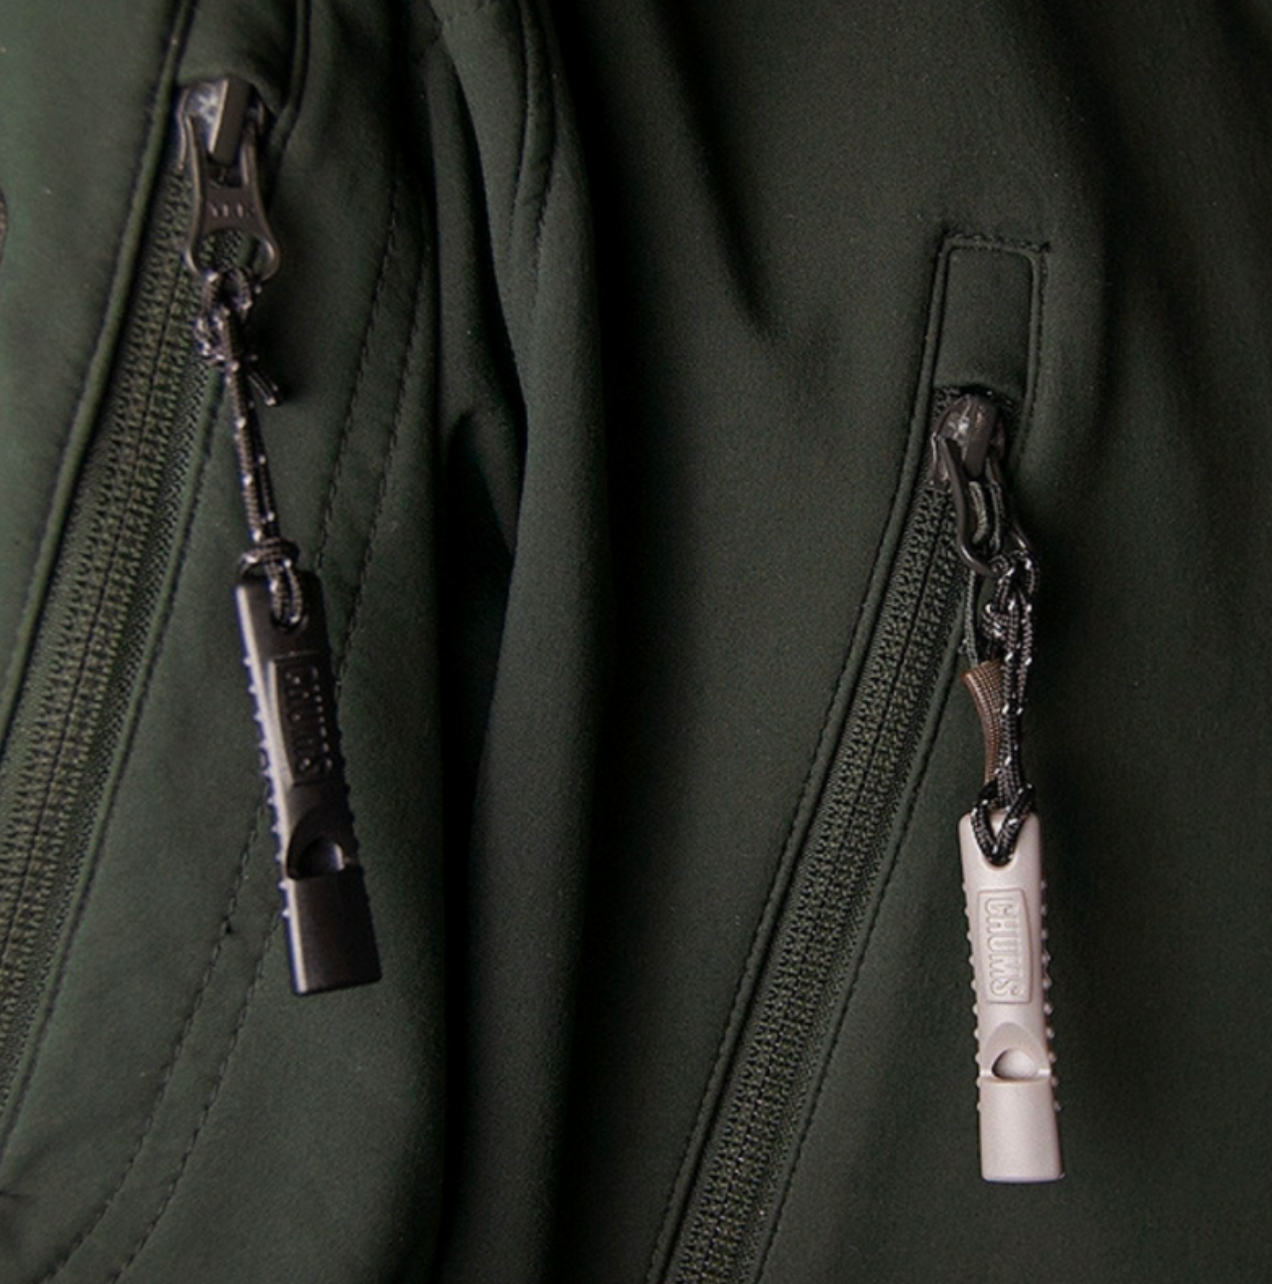 Trio of durable zipper pull safety whistles for on-the-go personal security.